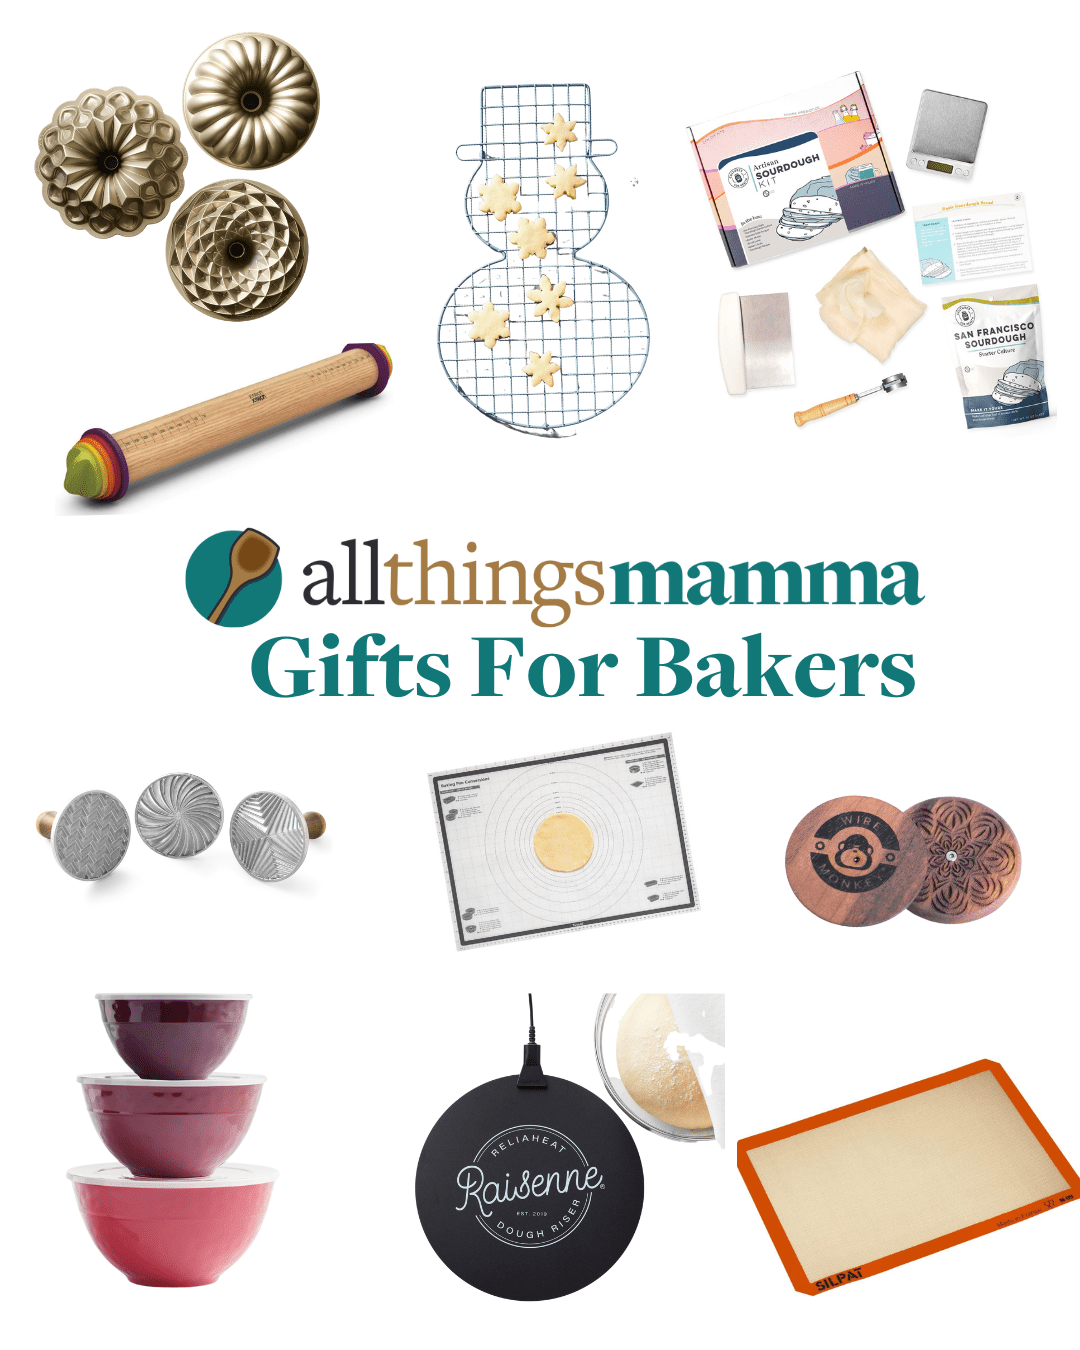 Holiday Gift Guide: Gifts for Bakers - All Things Mamma